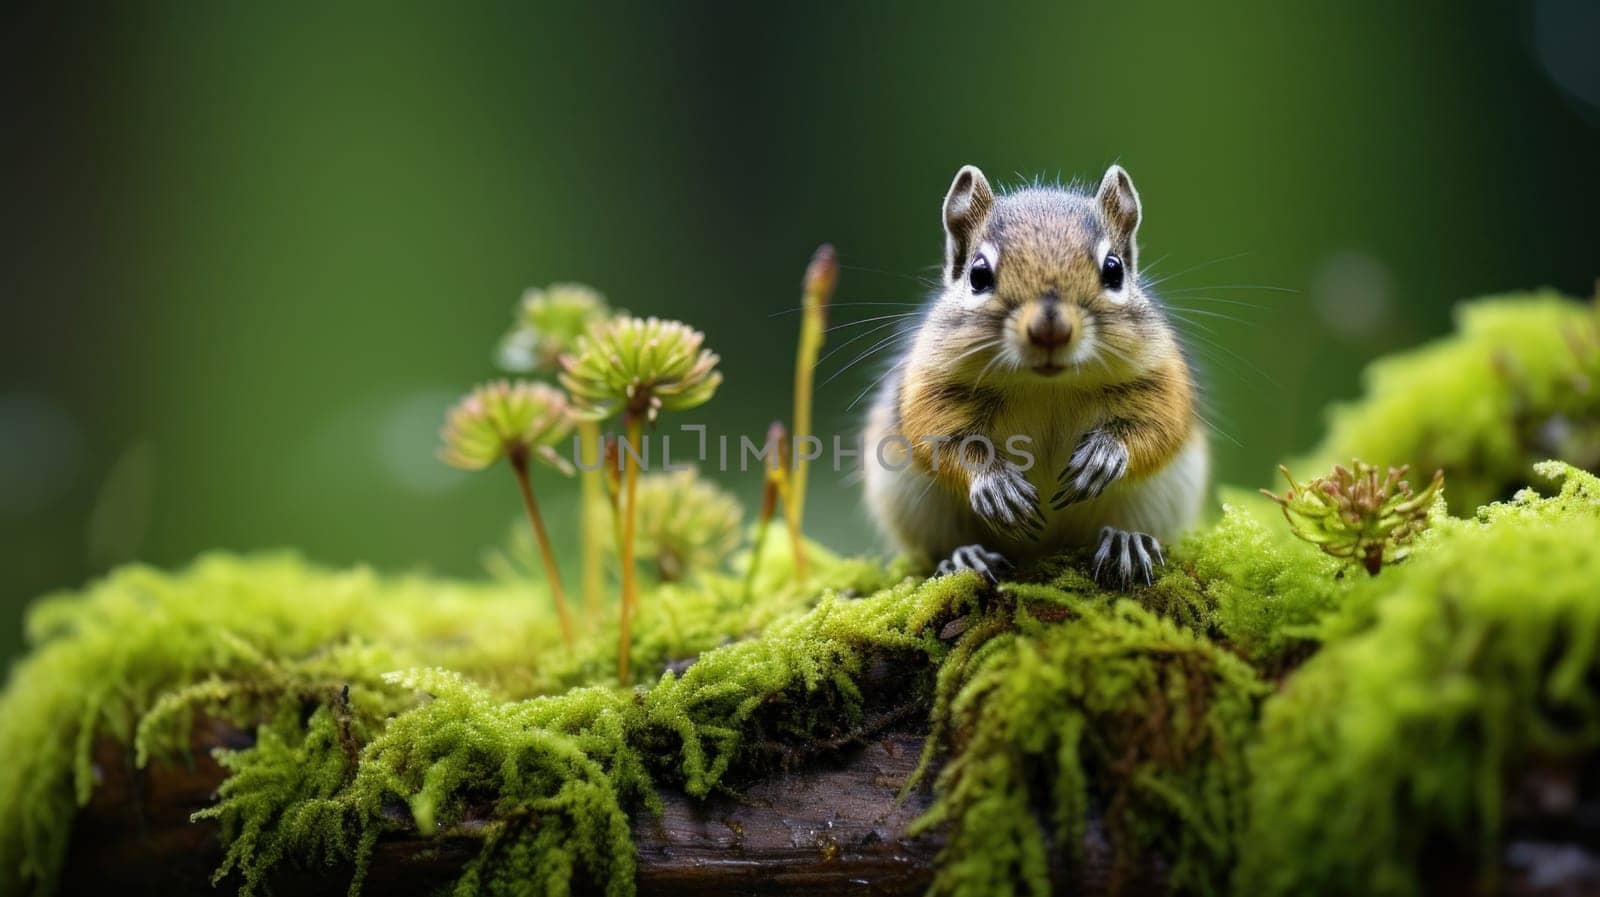 A small rodent sitting on top of a moss covered log